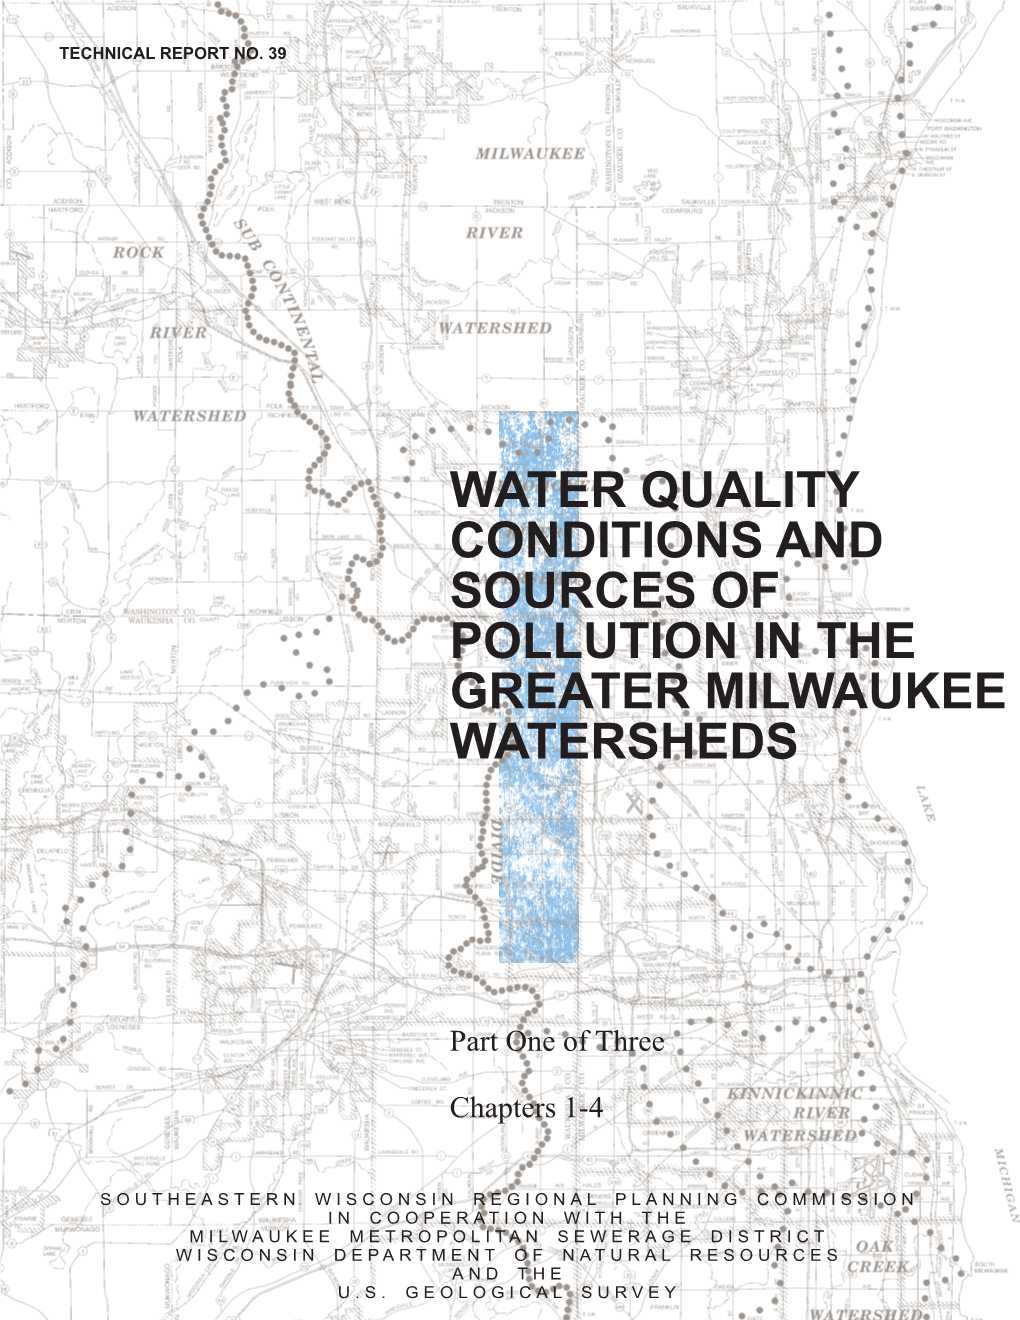 Water Quality Conditions and Sources of Pollution in the Greater Milwaukee Watersheds